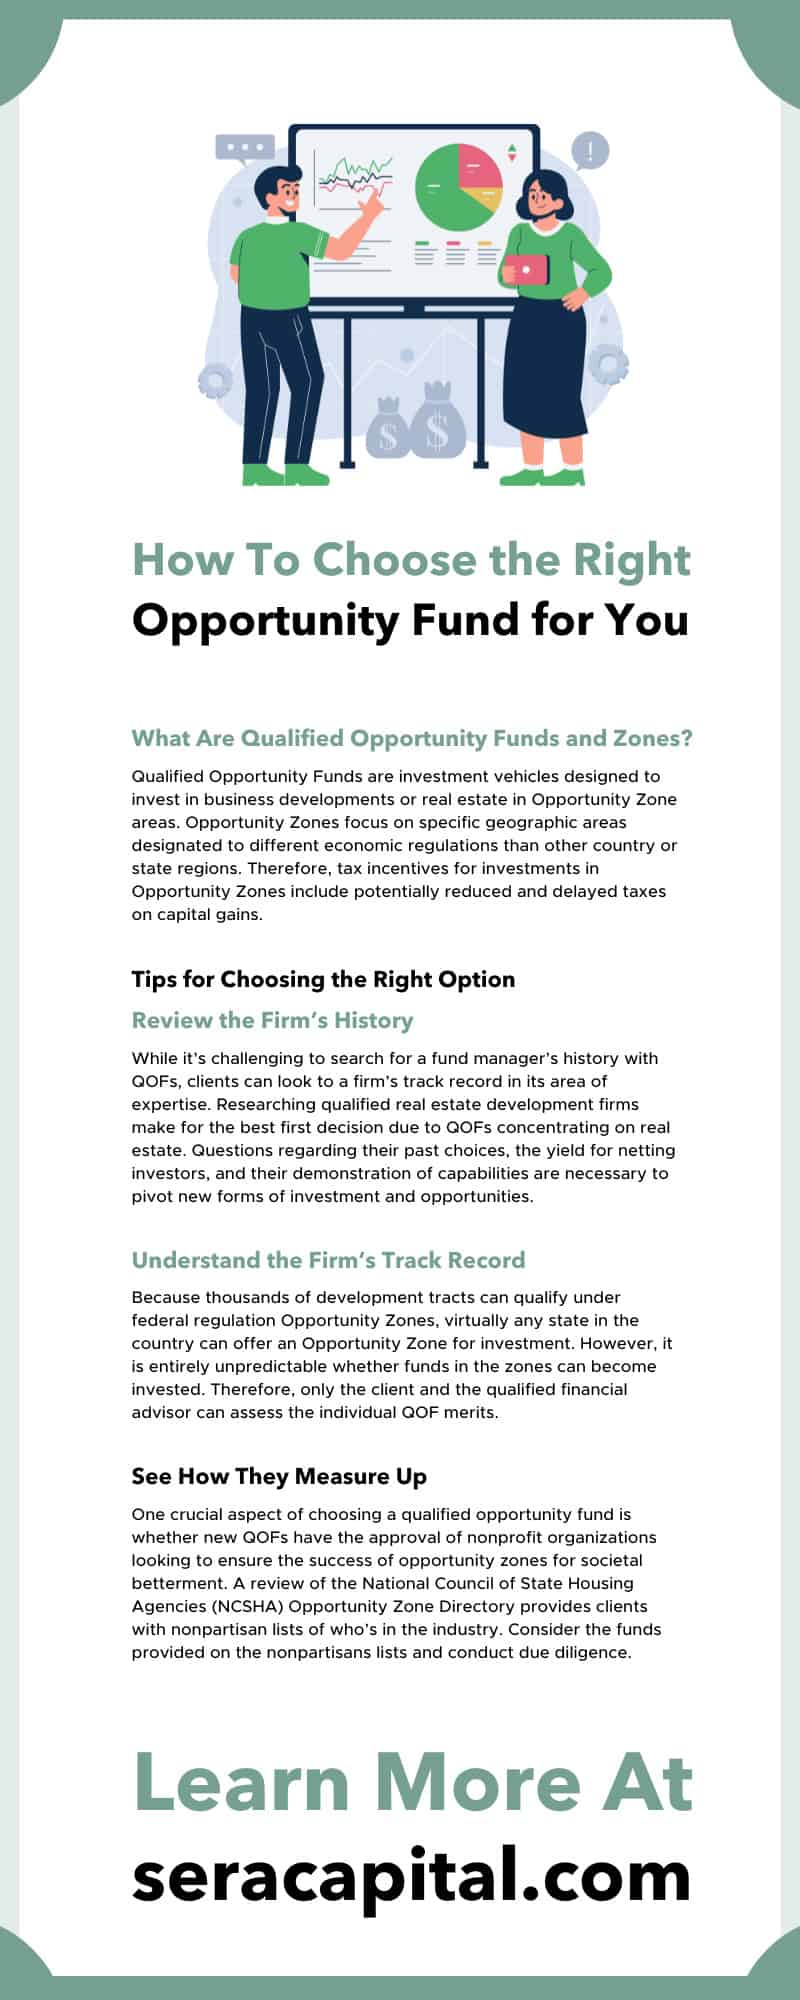 How To Choose the Right Opportunity Fund for You 